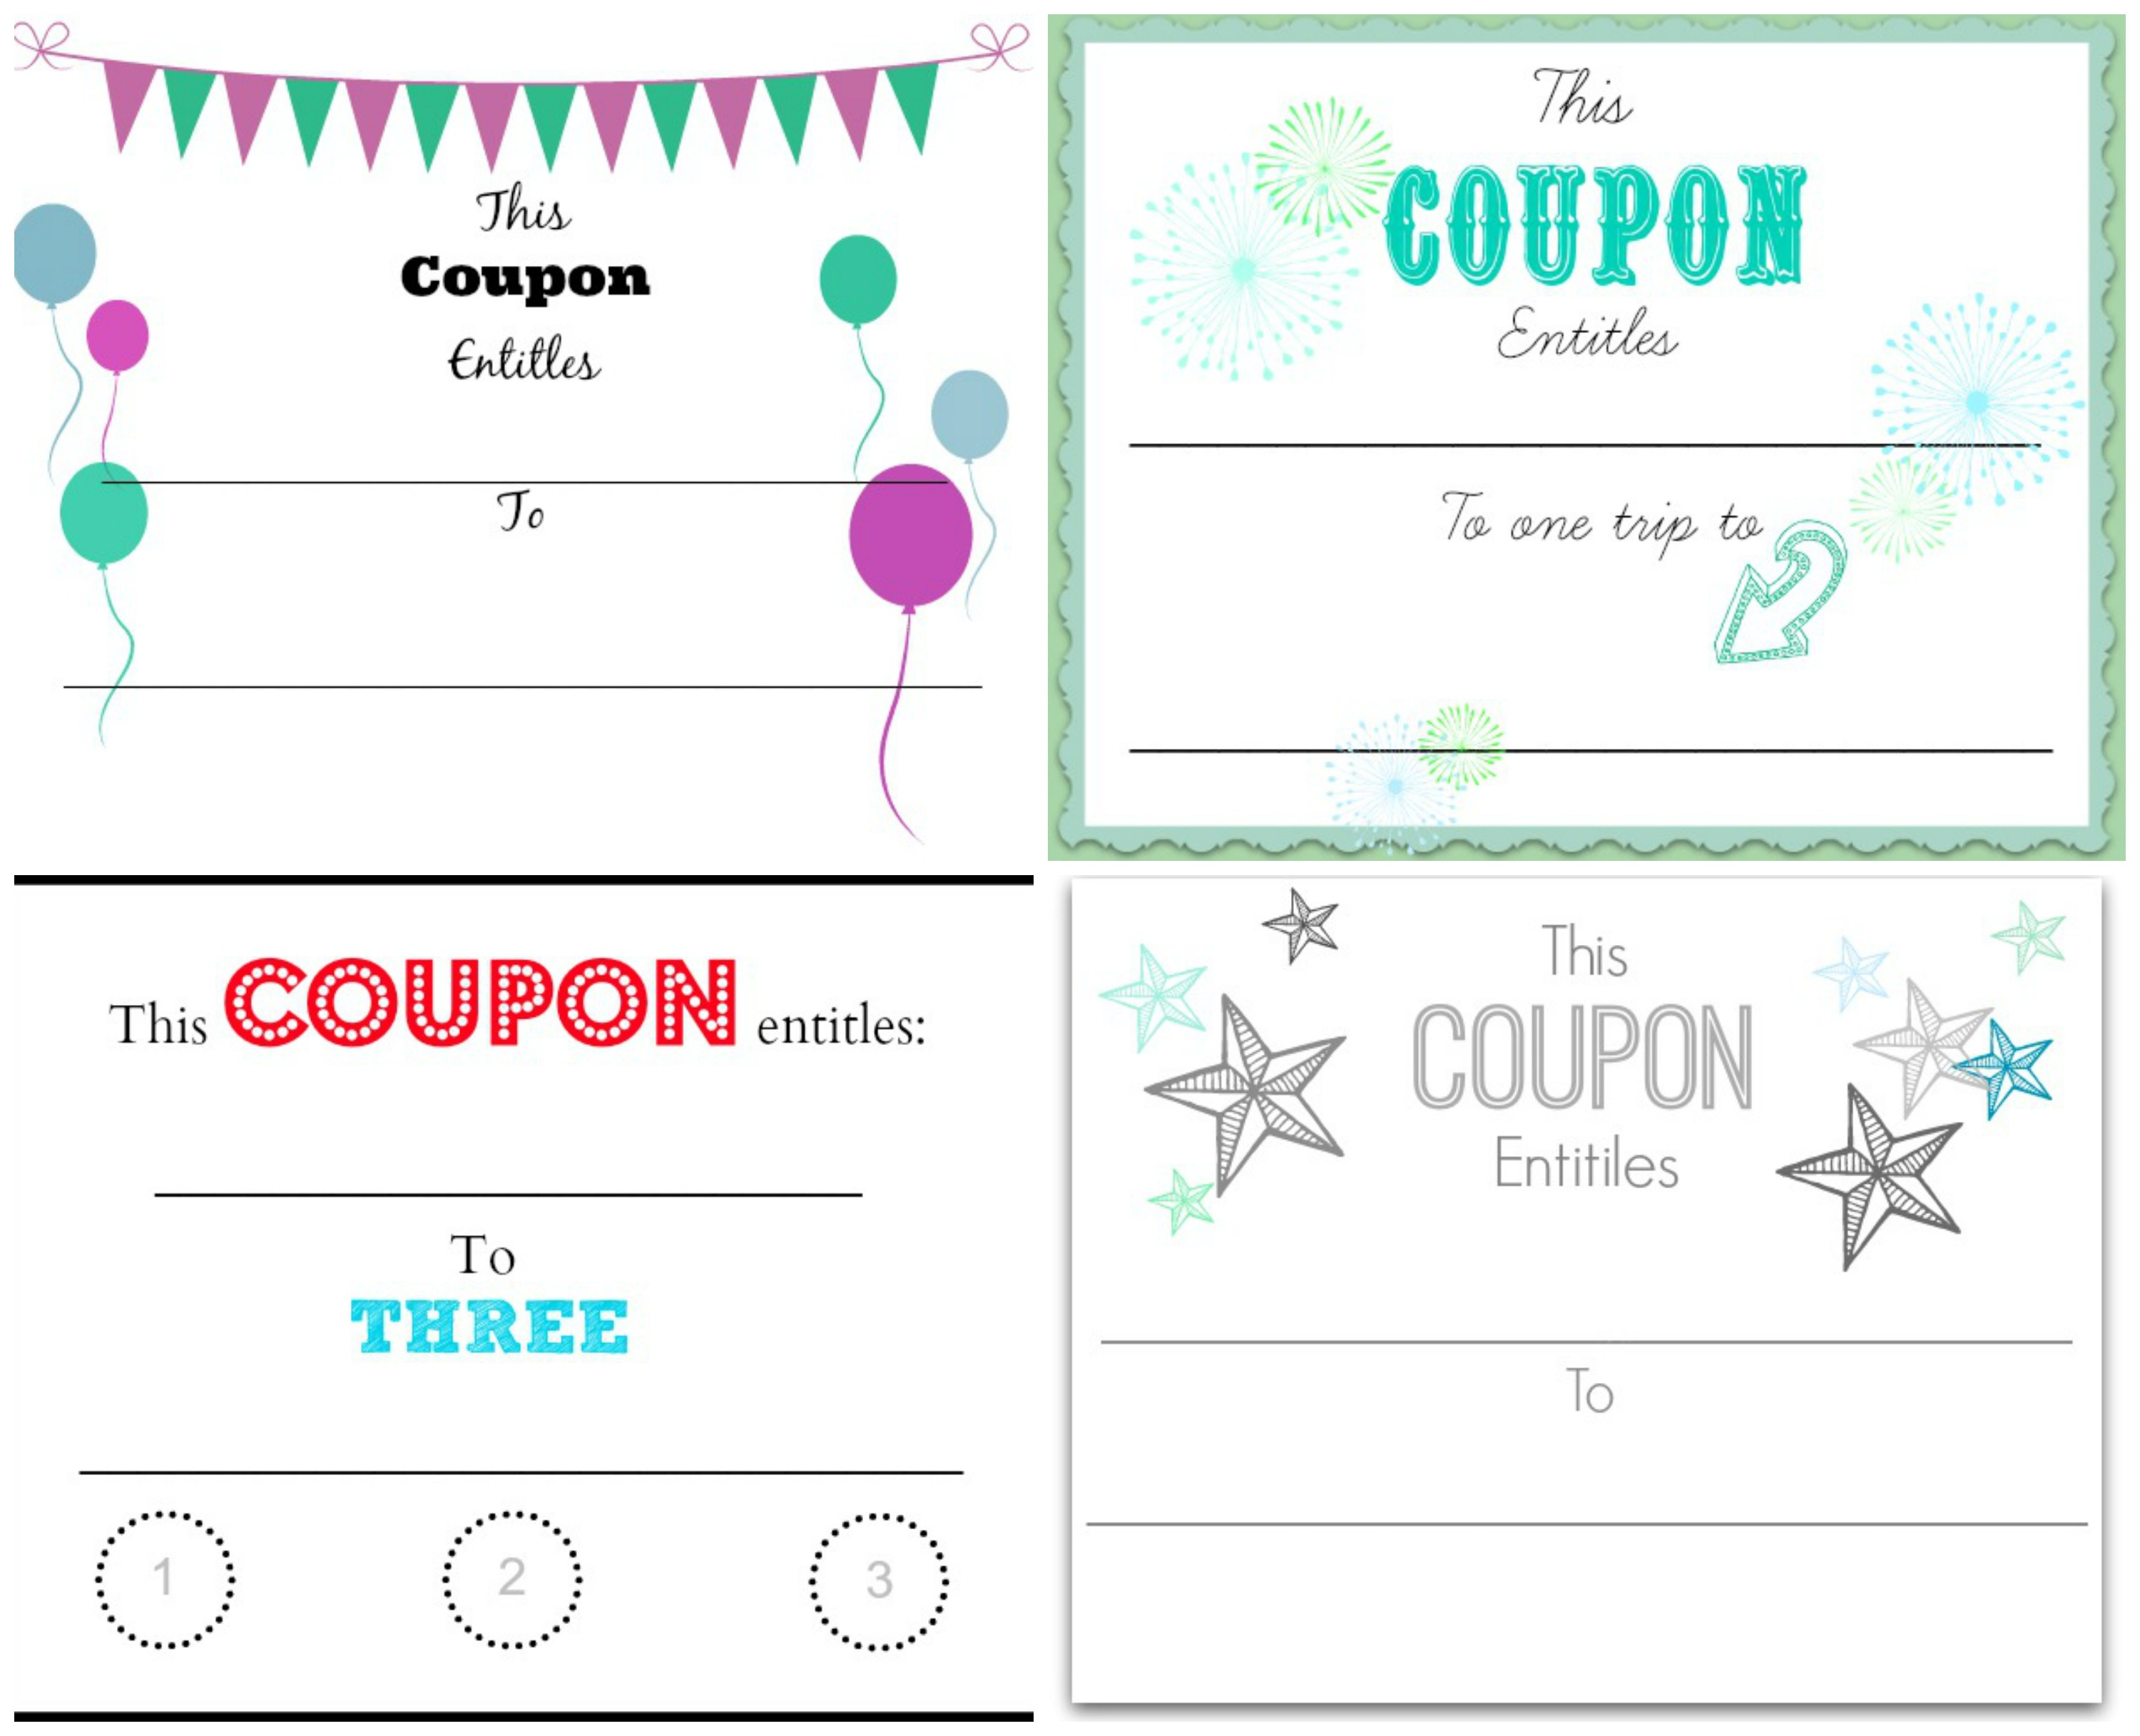 Blank Coupons Templates 29 Images Of Customizable Coupon Template - Make Your Own Printable Coupons For Free